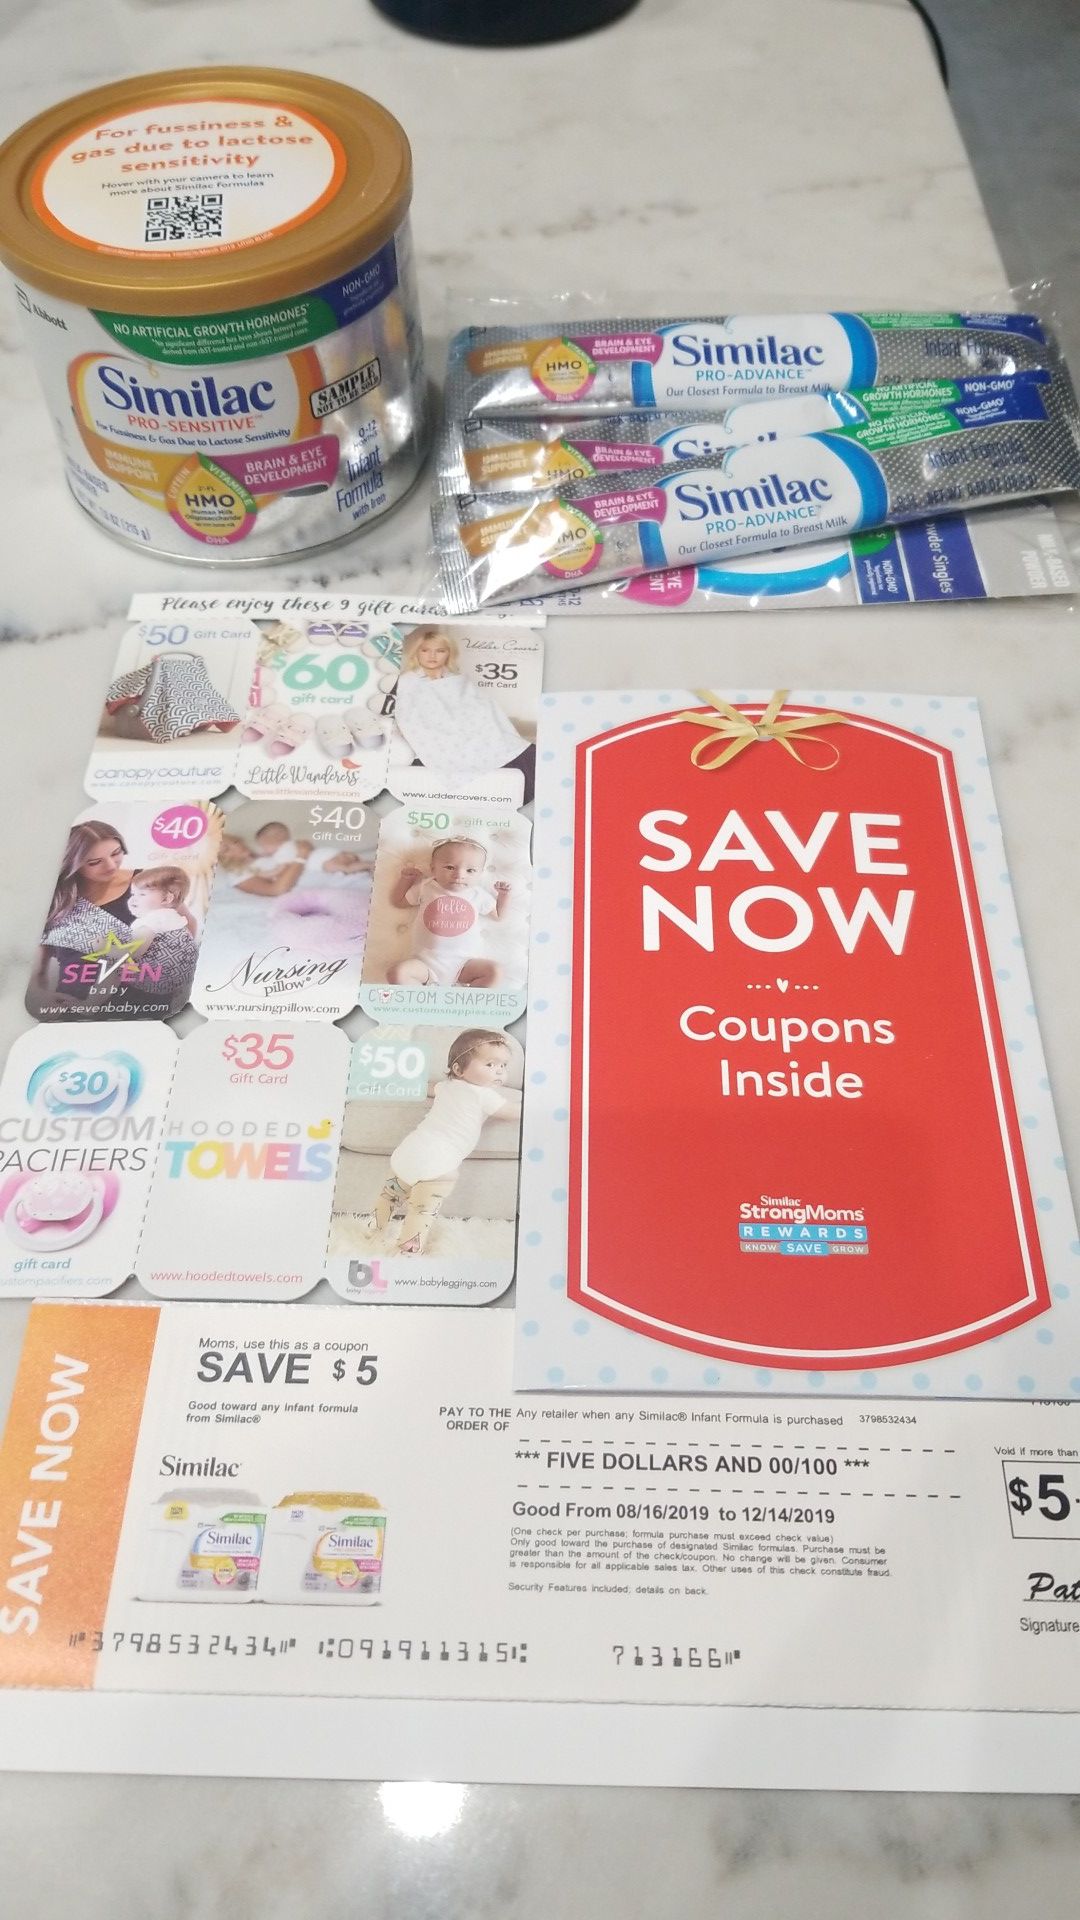 Similac formula and over $20 in coupons